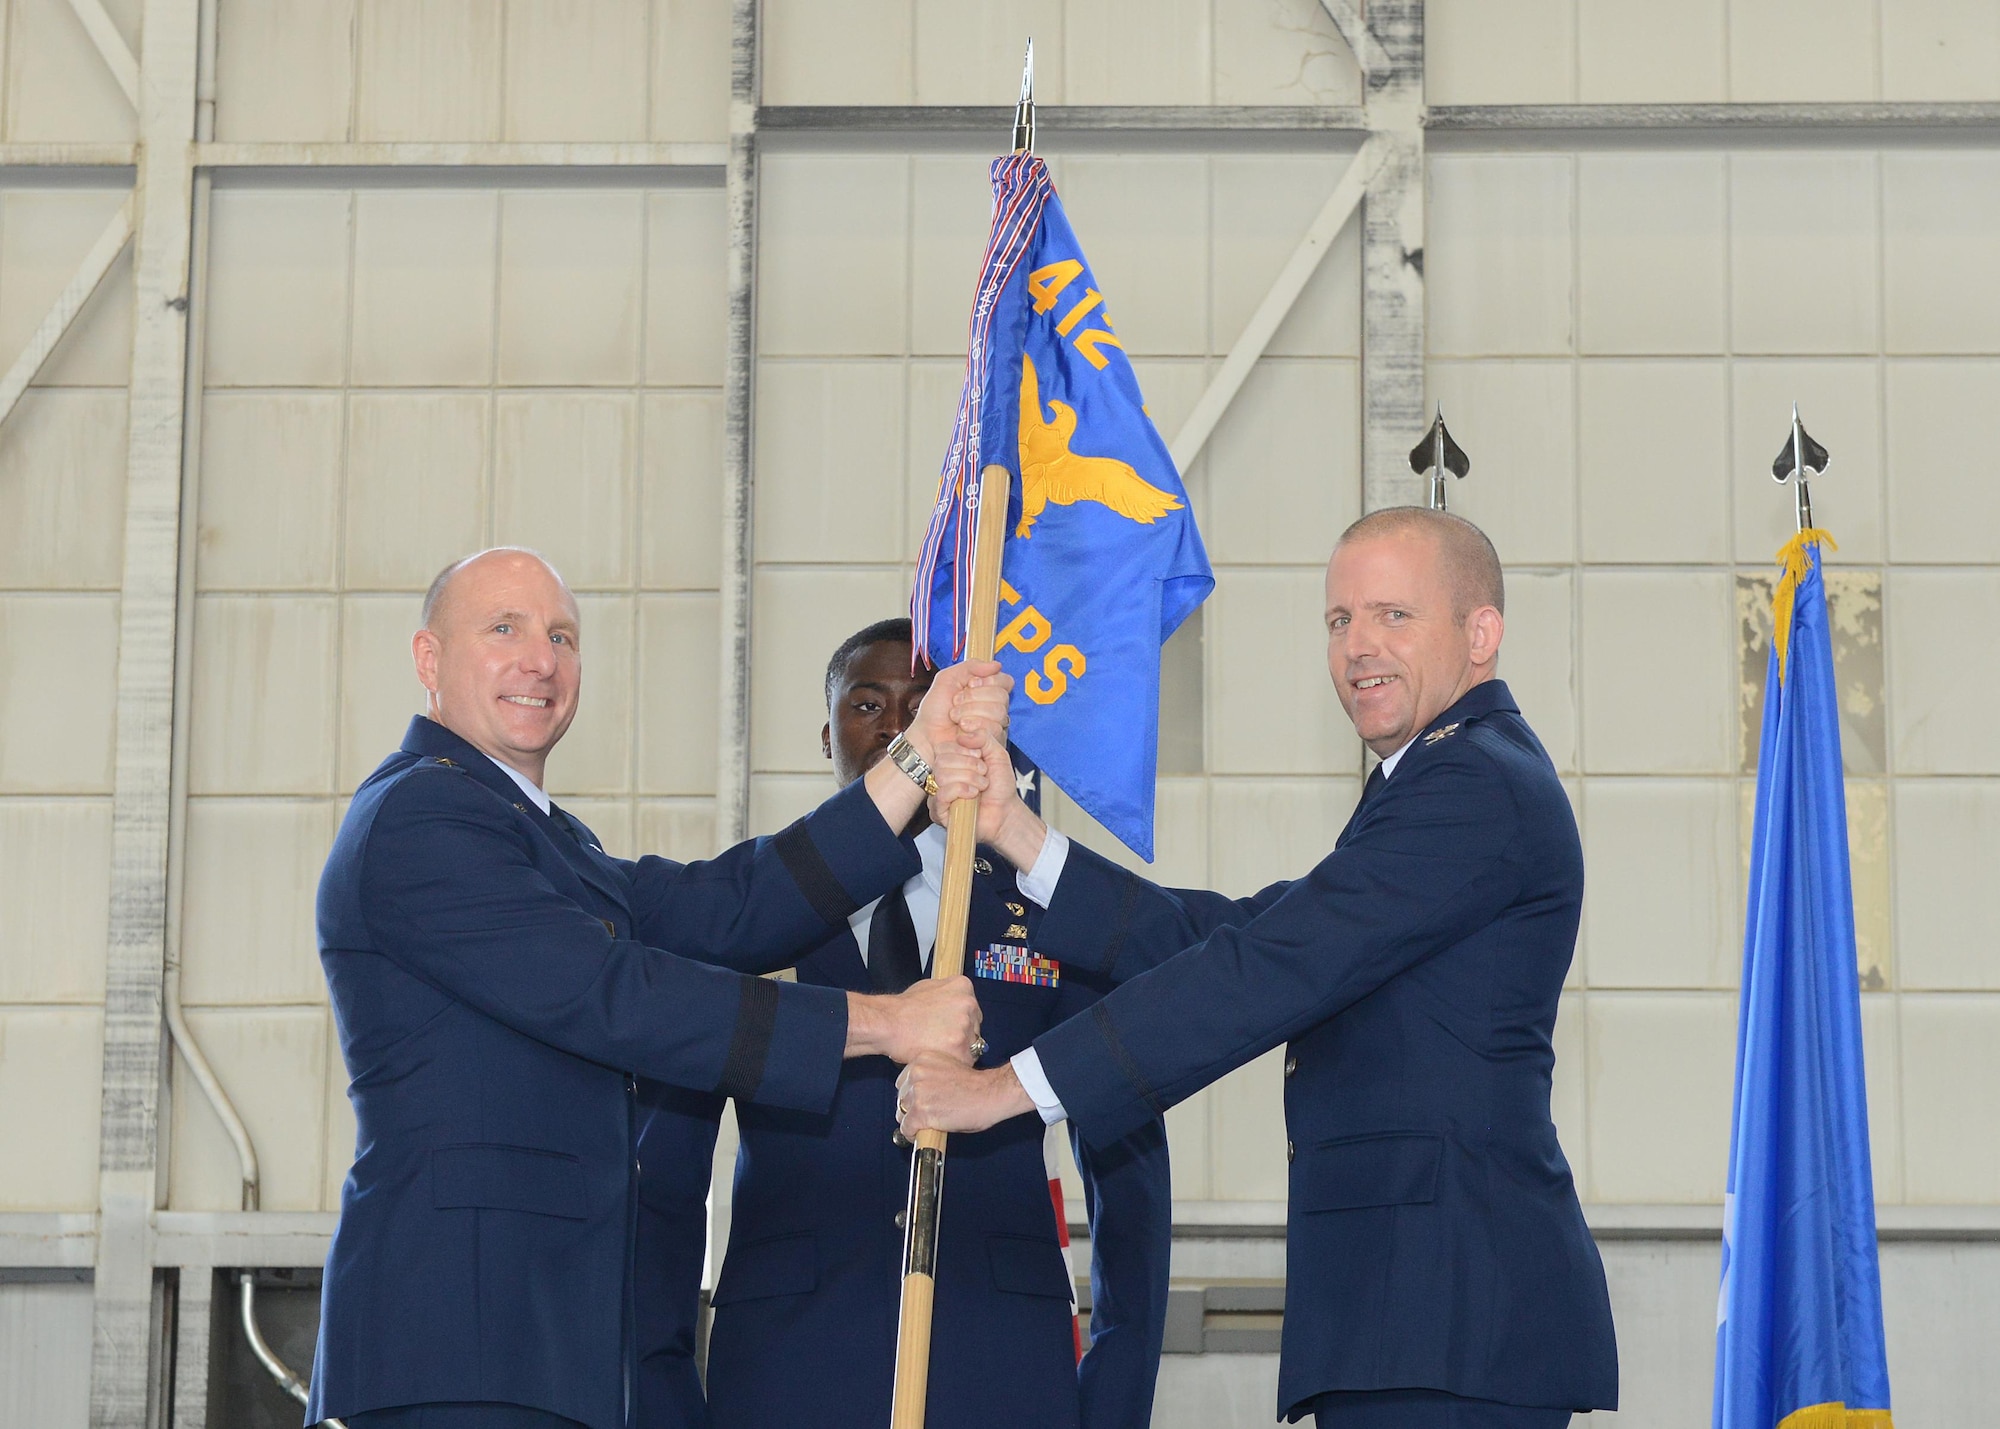 Brig. Gen. Carl Schaefer, 412th Test Wing commander (left), and new U.S. Air Force Test Pilot School commandant, Col. Matthew Higer, pose with the school’s guidon during a change of command ceremony in Hangar 1207 July 14. (U.S. Air Force photo by Kenji Thuloweit)